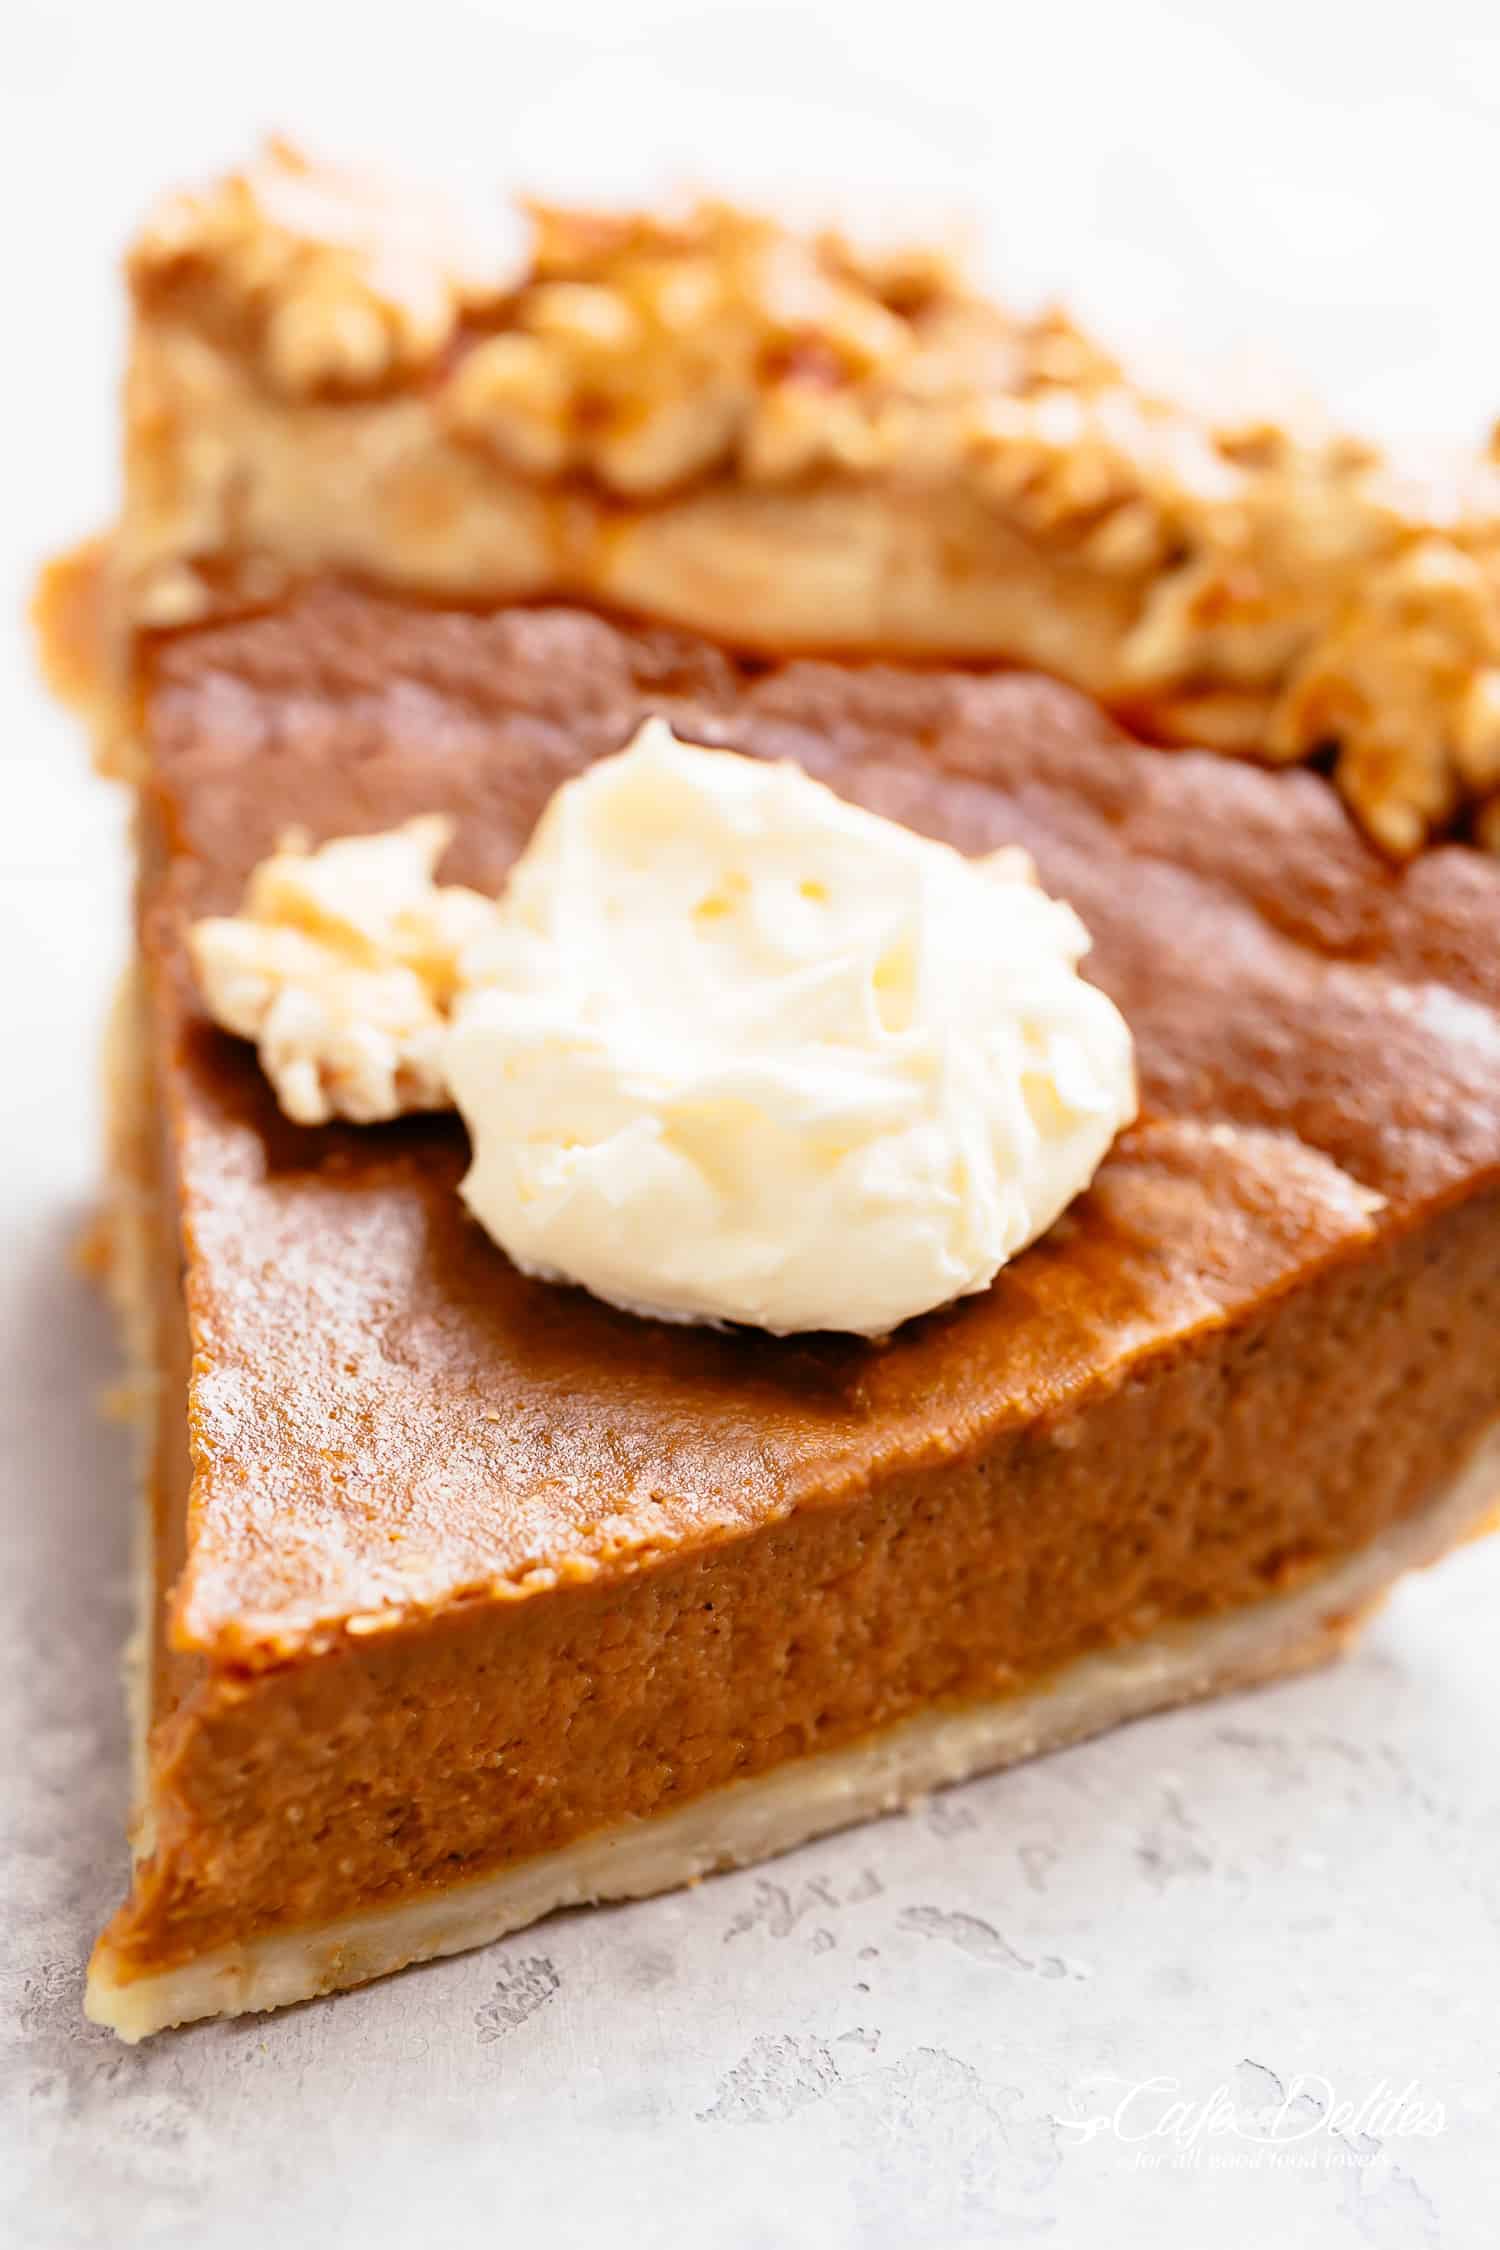 A slice of Pumpkin Pie with whipped cream!